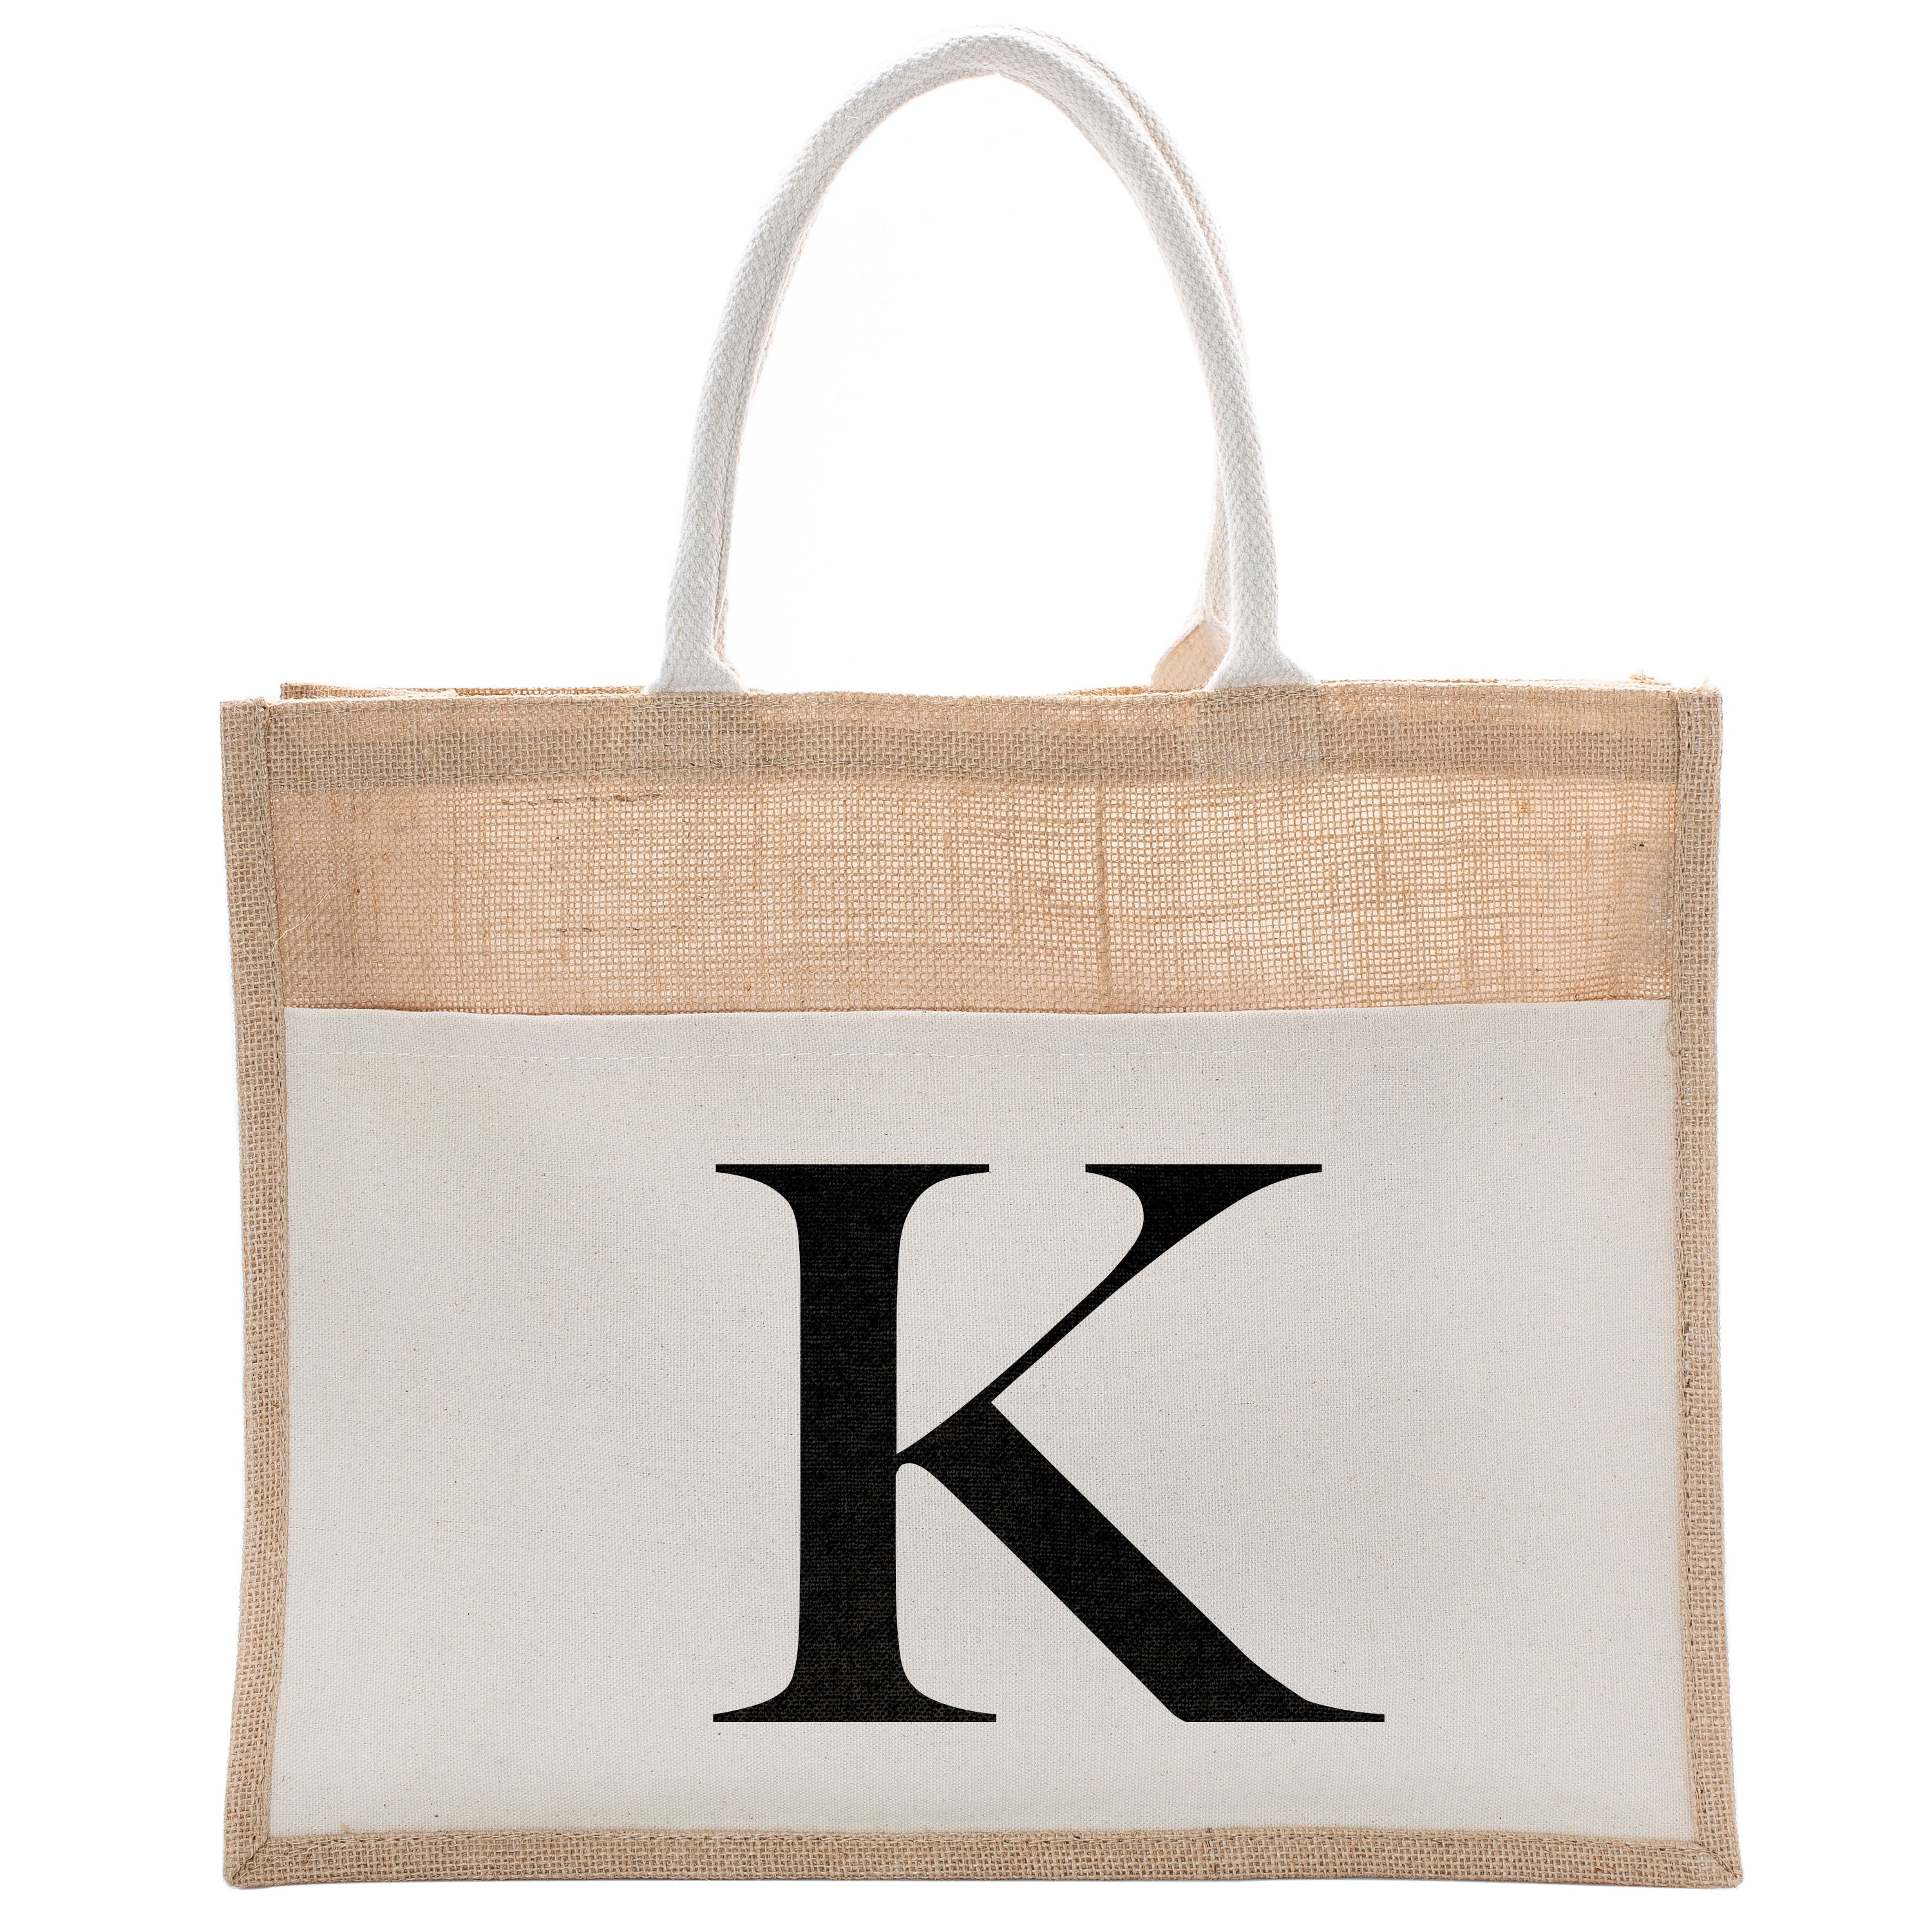 Black Linen Canvas Tote Bag Floral Initial For Beach Workout Yoga